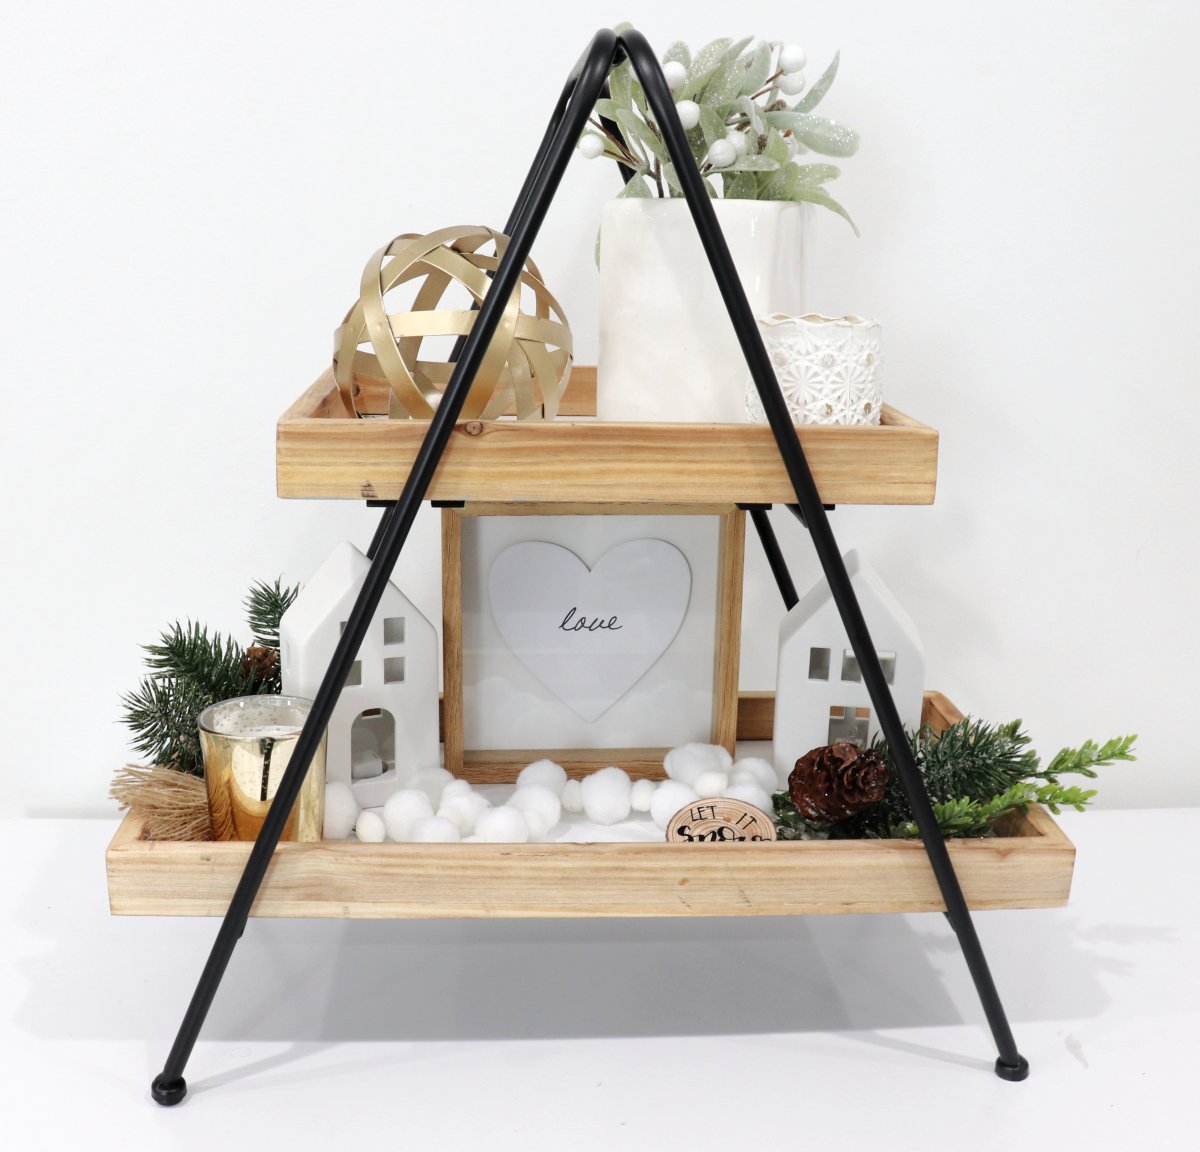 Image contains a two-tiered tray decorated for winter with neutral colors and greenery.